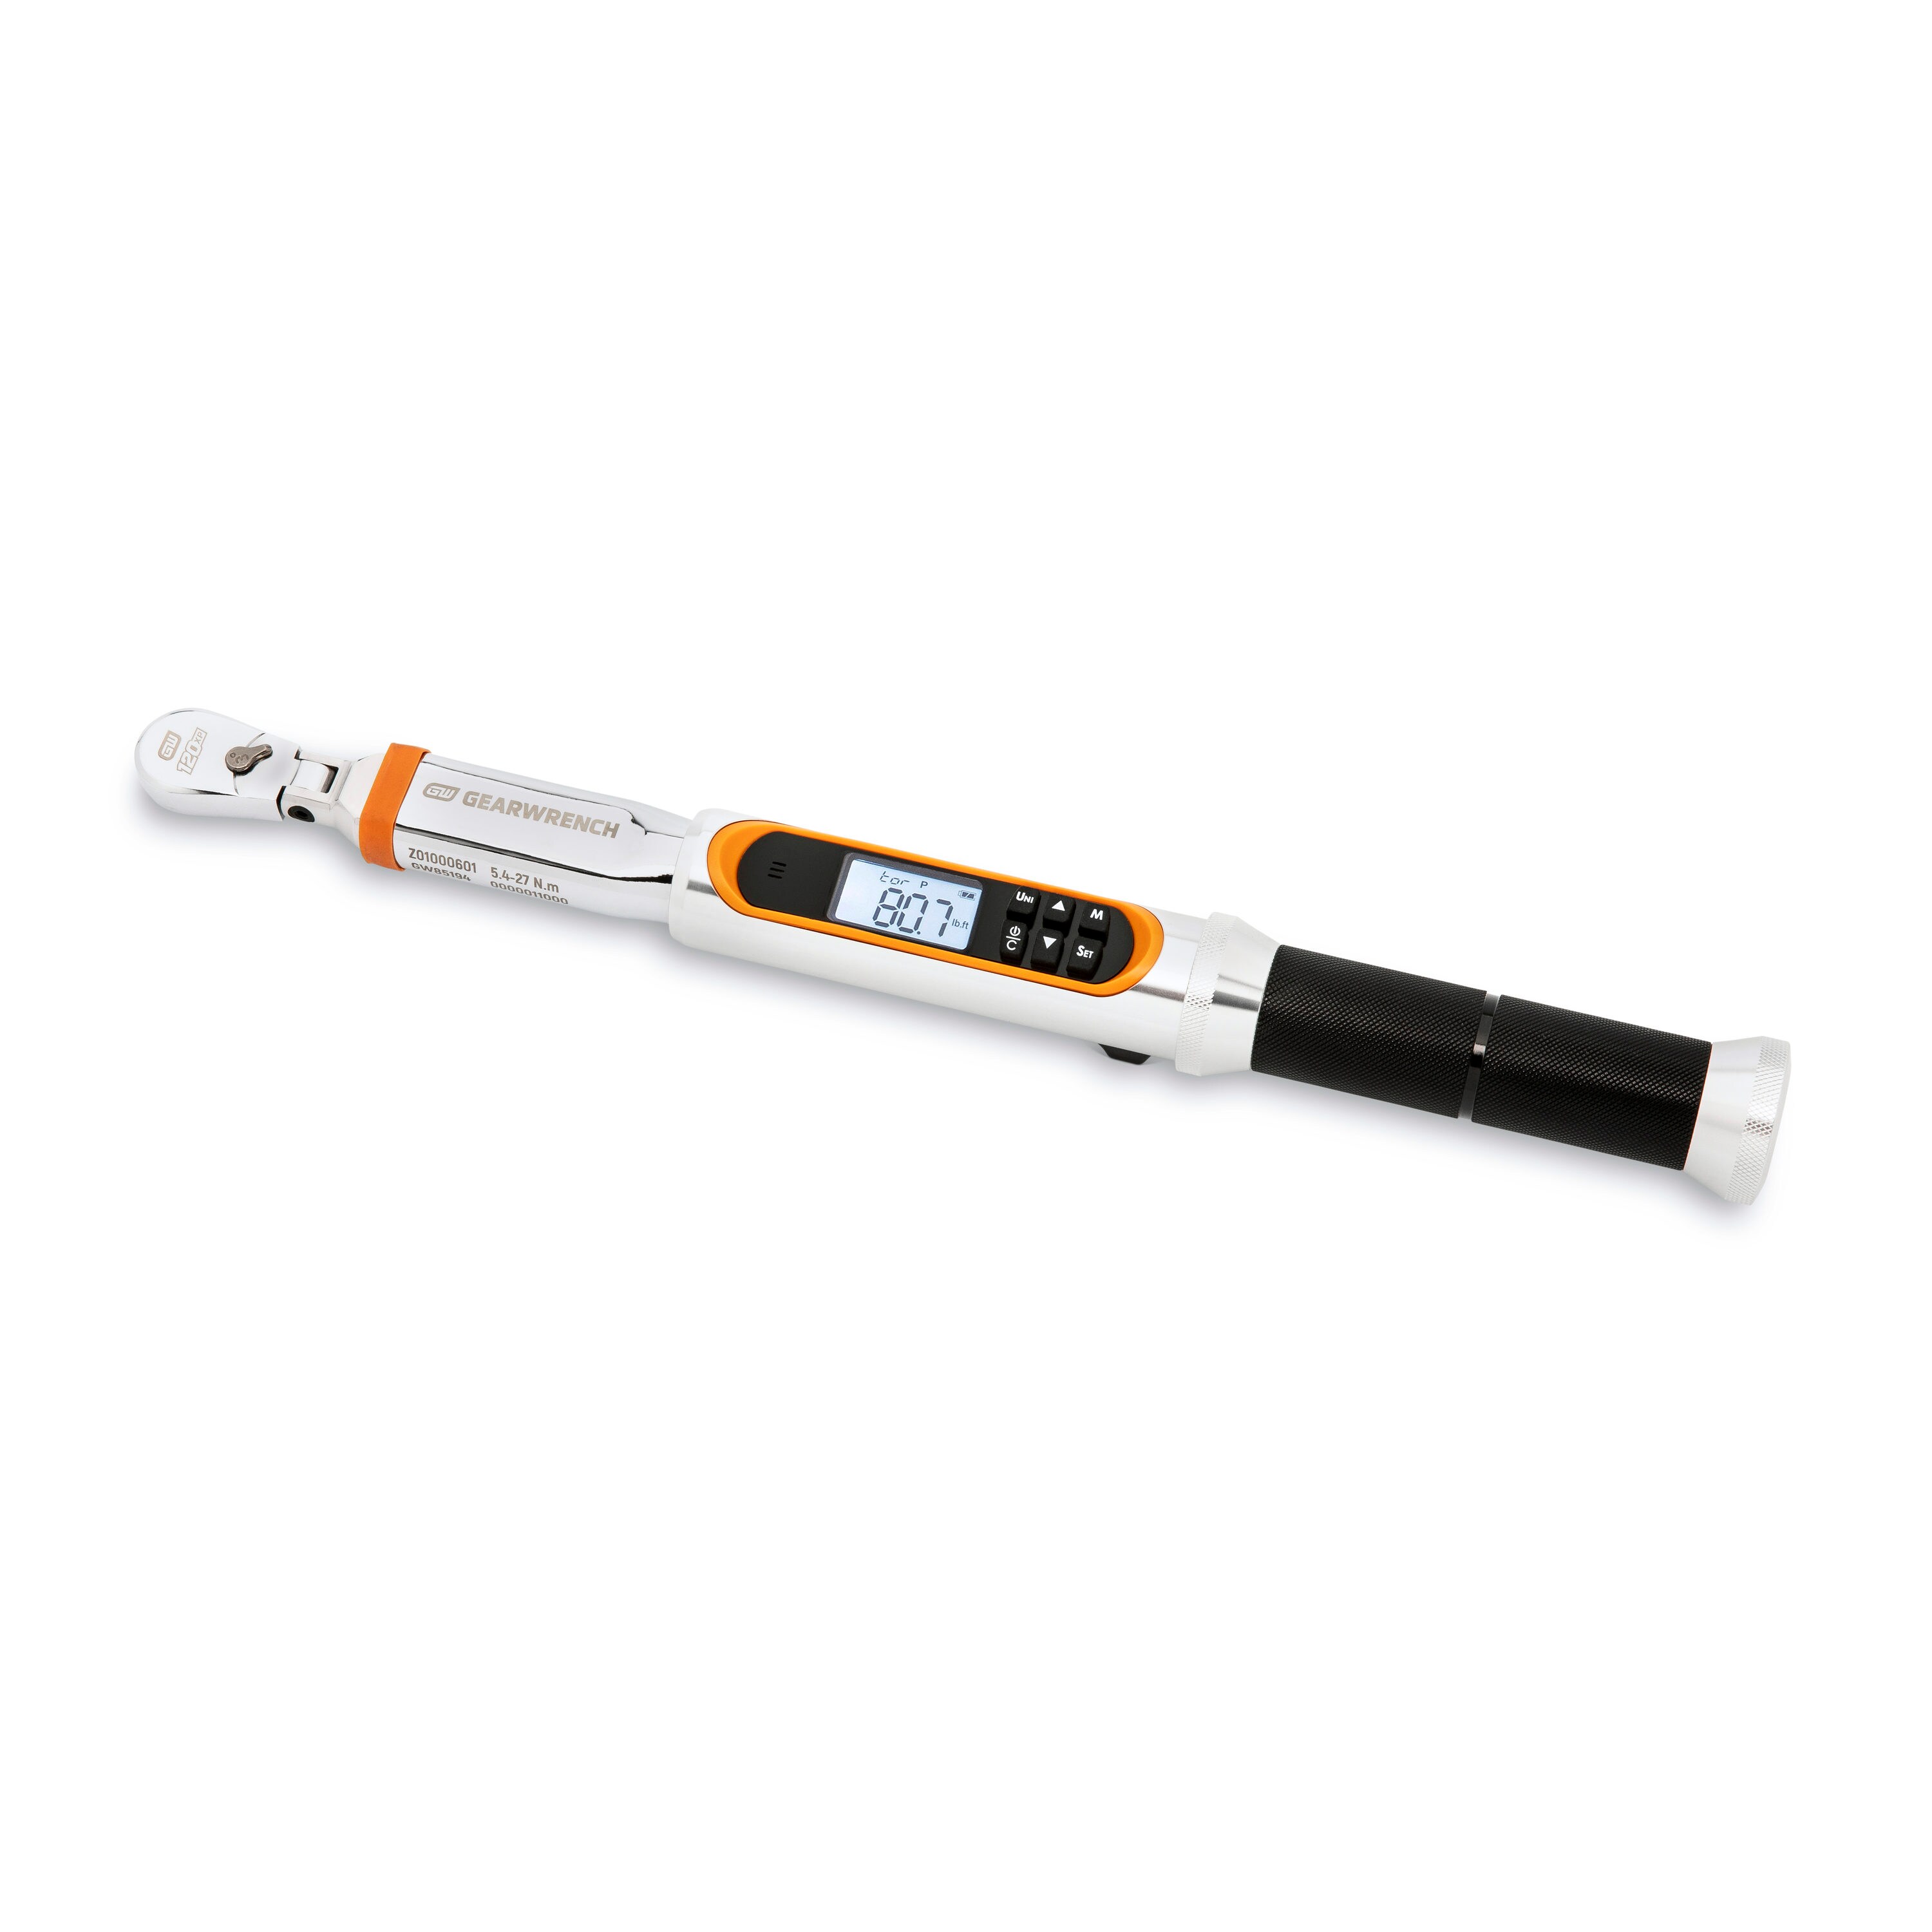 Resq 1/4"Digital Electronic 9-175 in.lb Torque Wrench 1-20 Nm reversible ratchet 